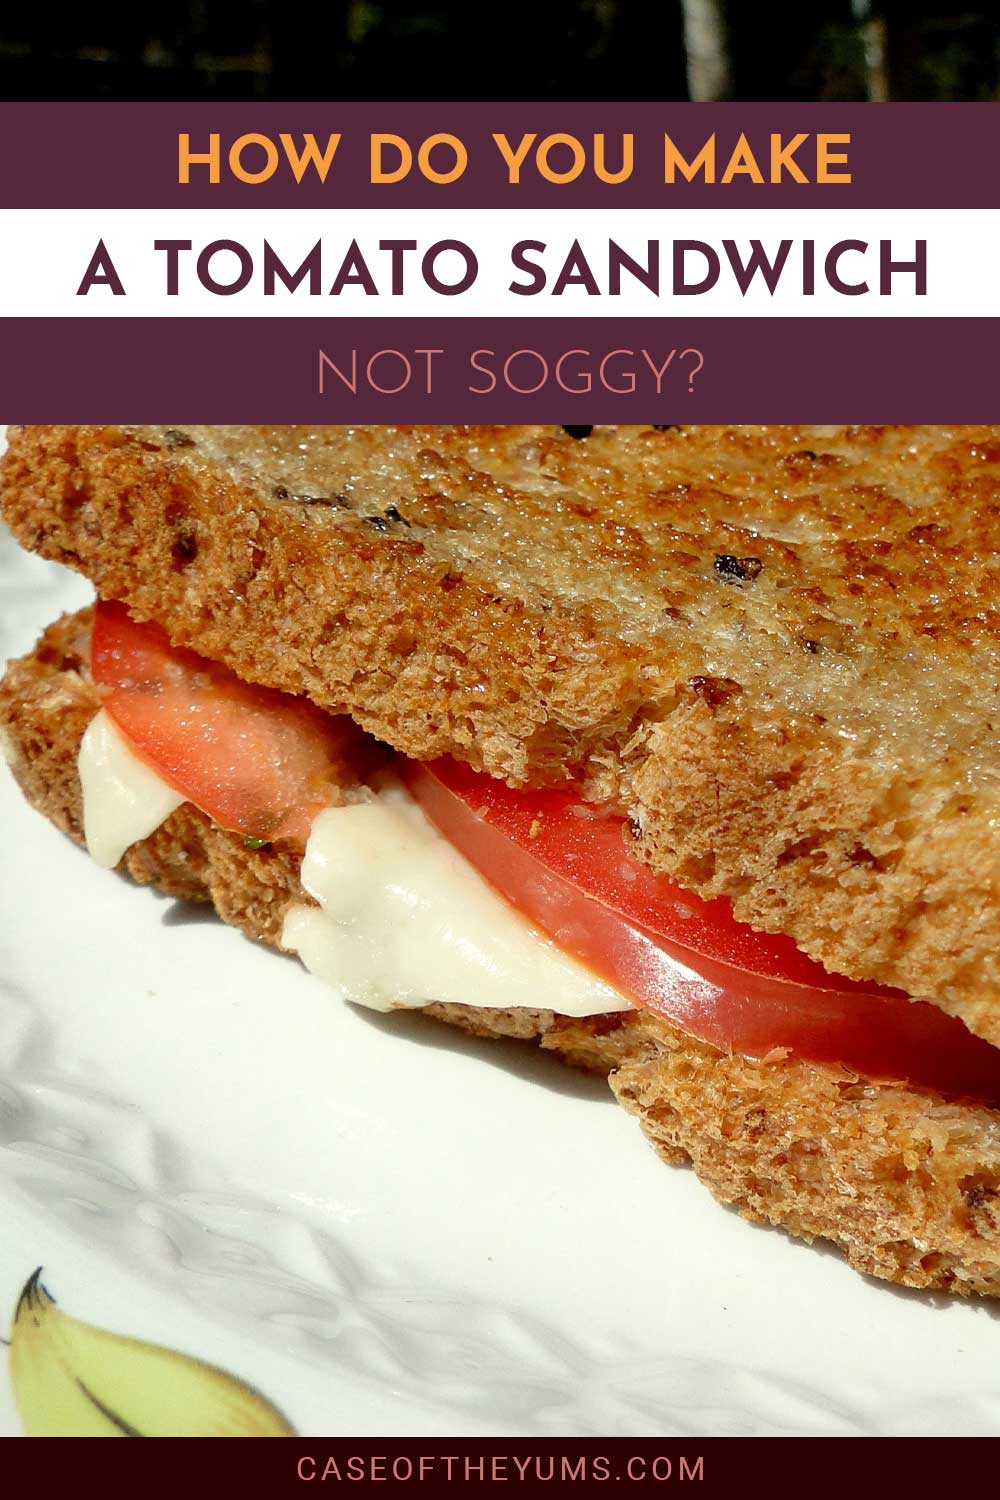 Brown toasted tomato sandwitch with cheese - How Do You Make It Not Soggy?